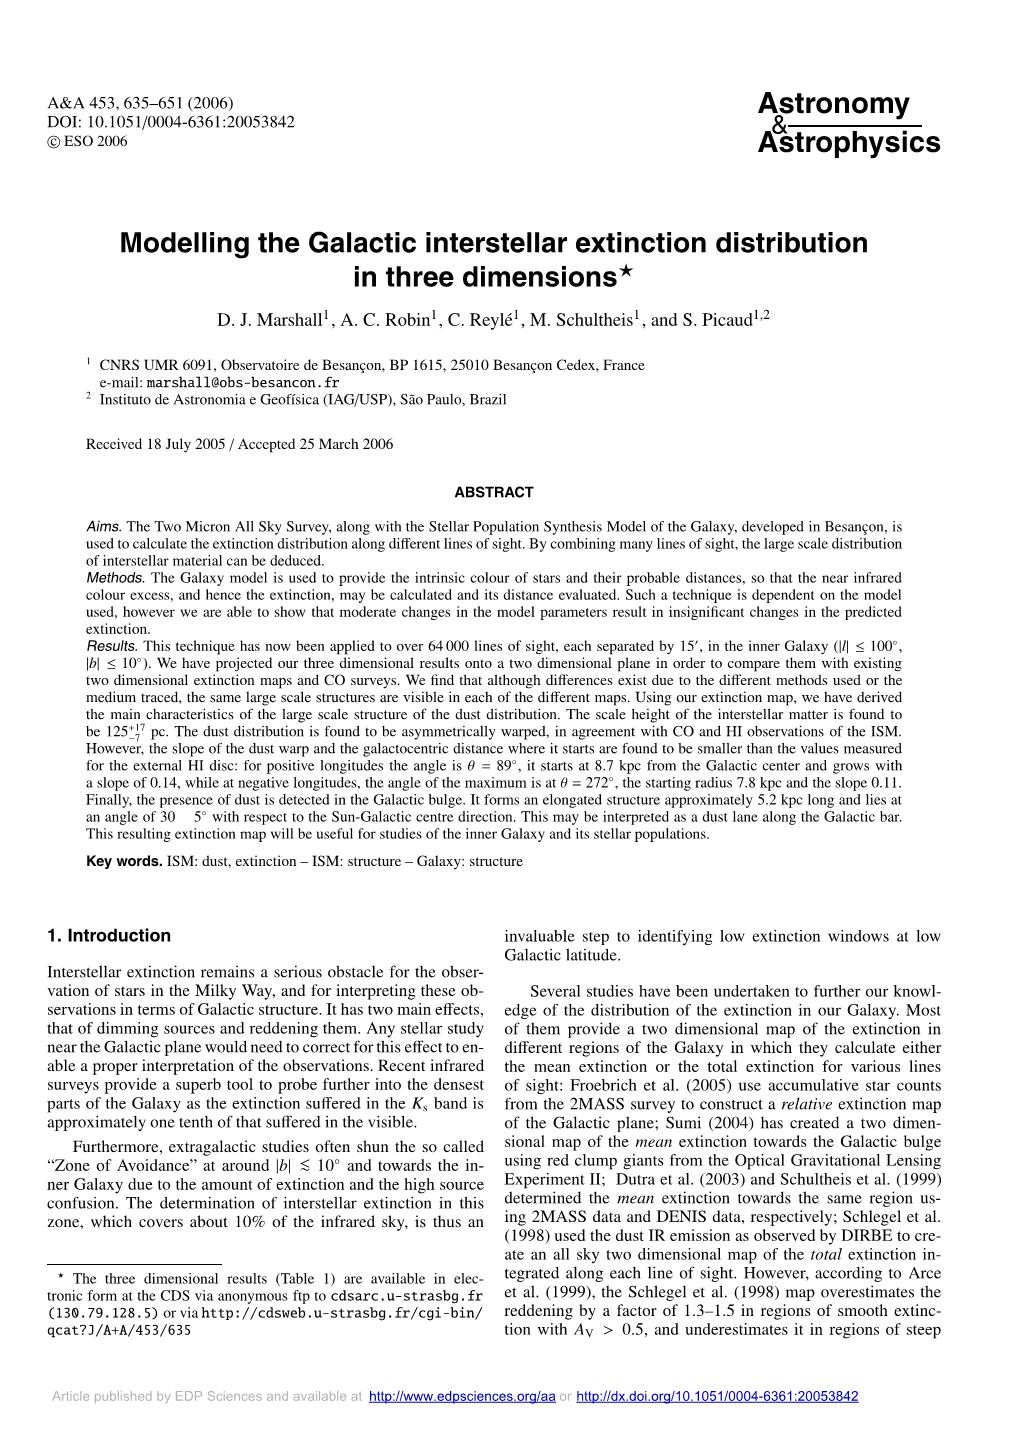 Modelling the Galactic Interstellar Extinction Distribution in Three Dimensions